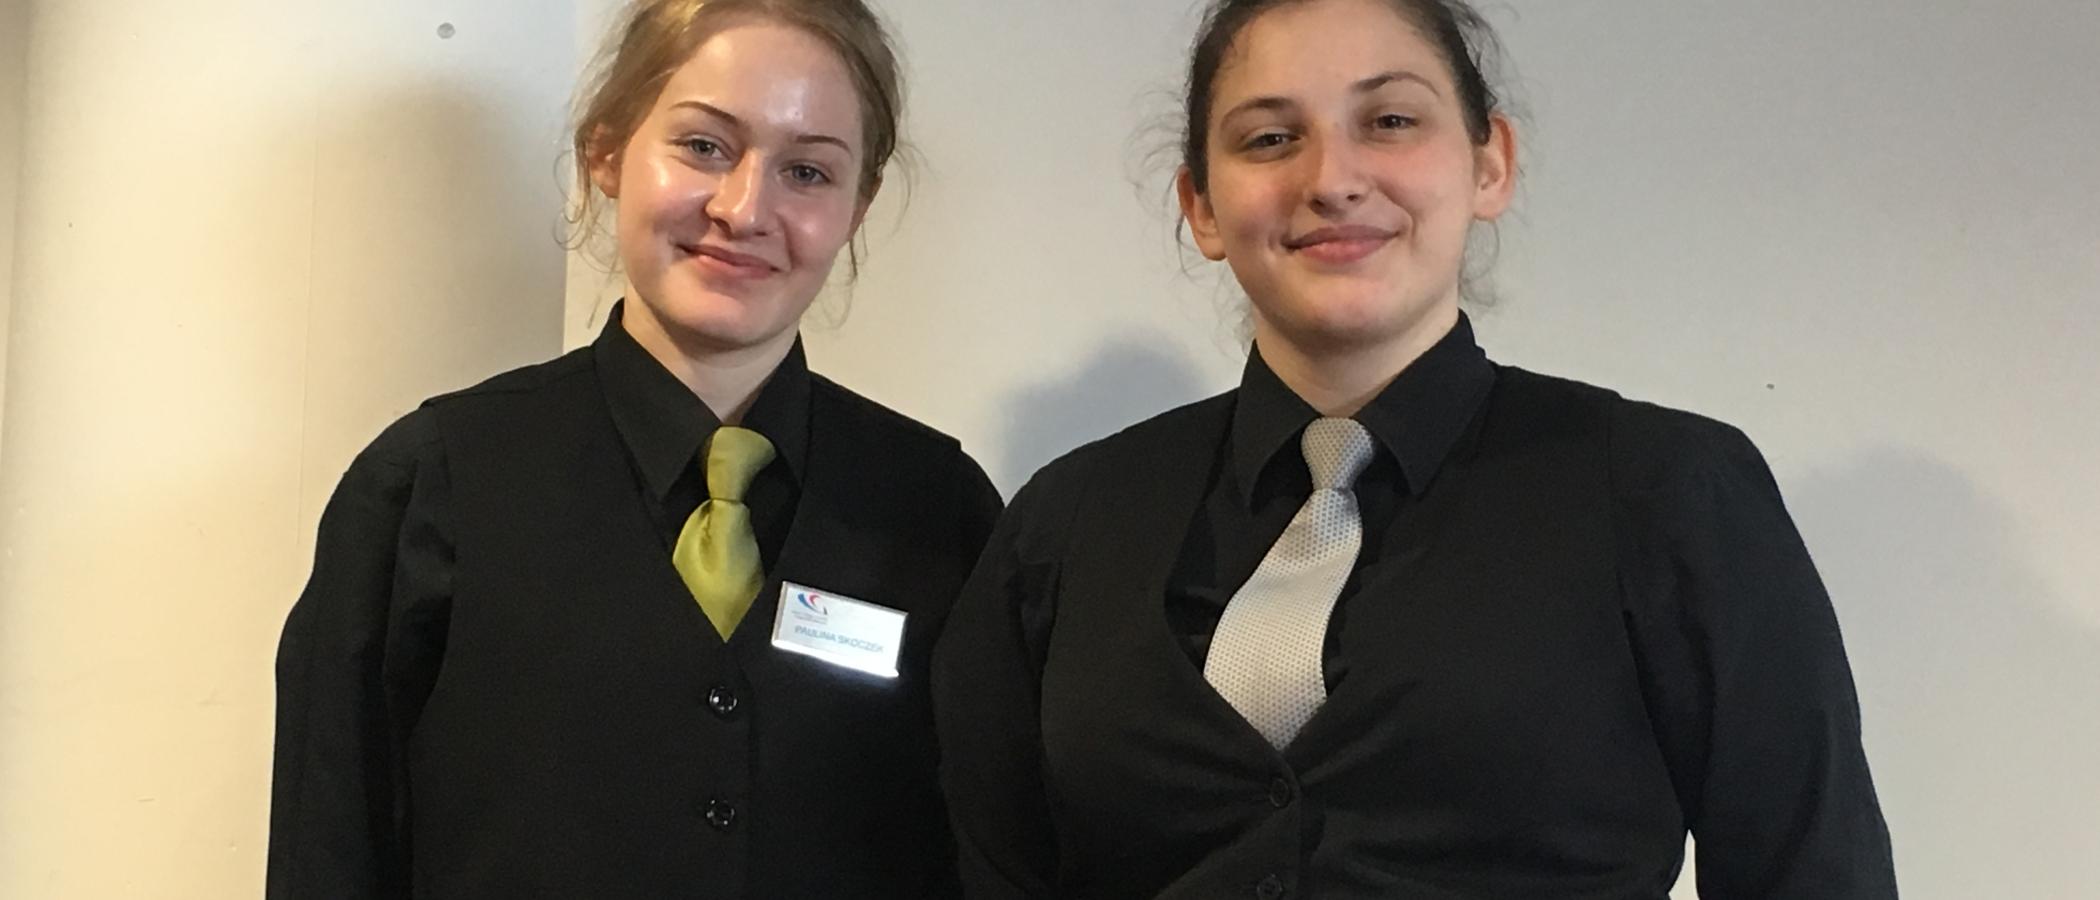 Catering students prepare to represent Wales